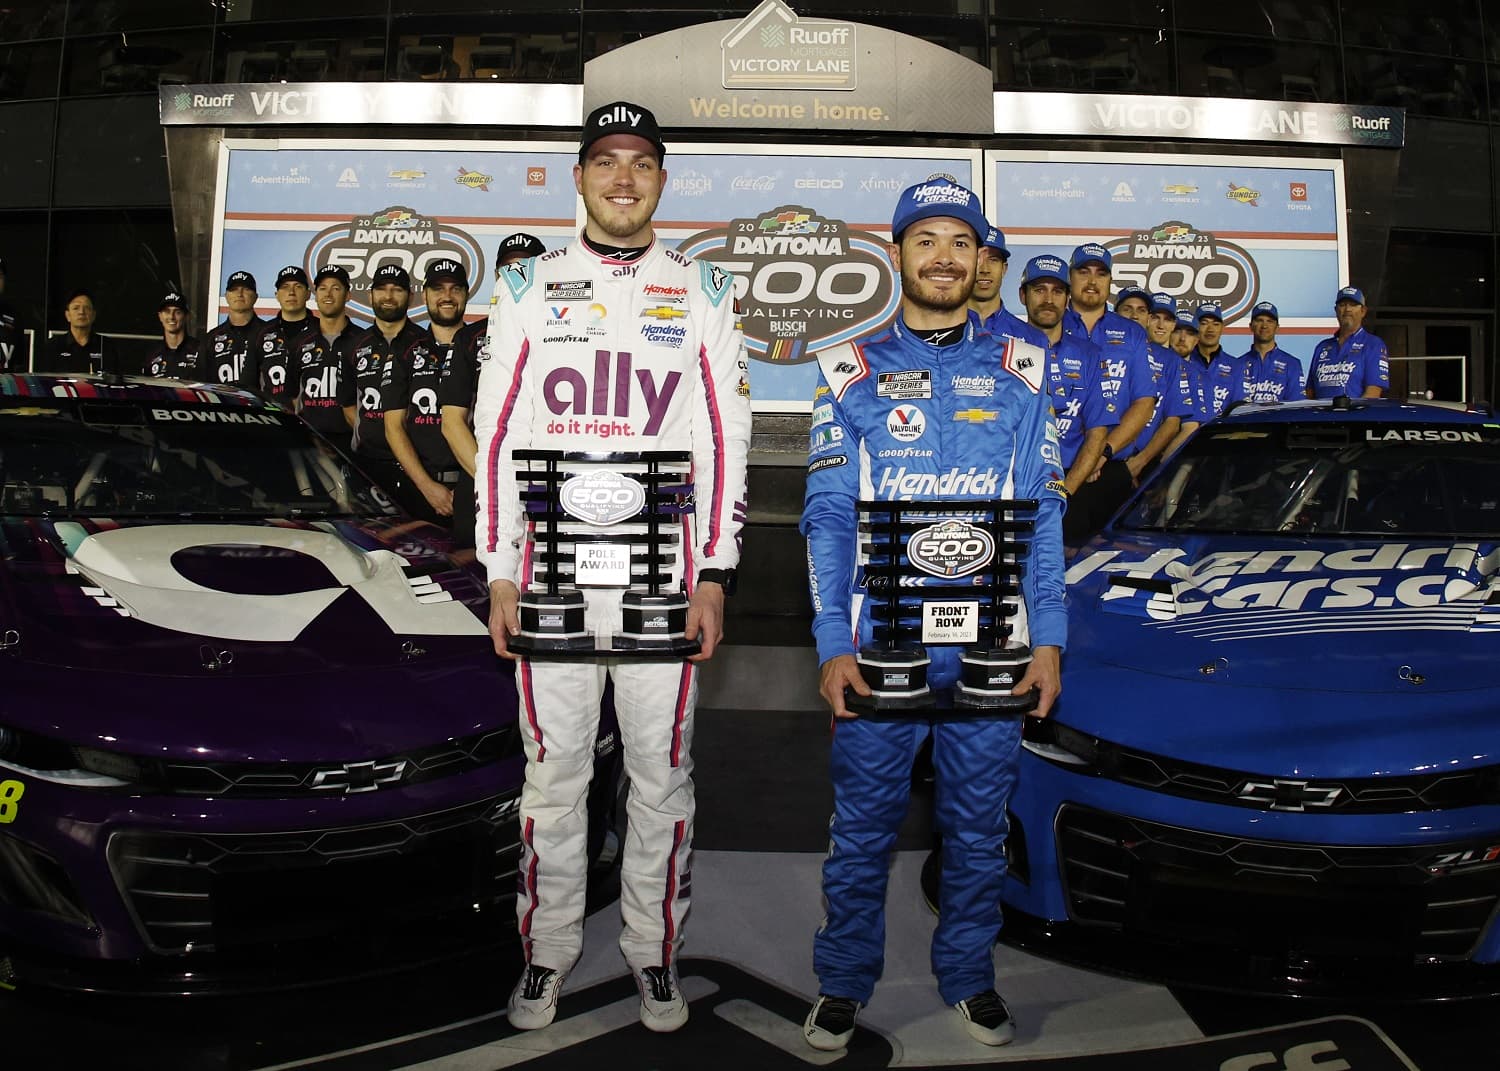 Pole Award winner Alex Bowman and front-row qualifier Kyle Larson pose for photos after the Busch Light Pole at Daytona International Speedway on Feb. 15, 2023.